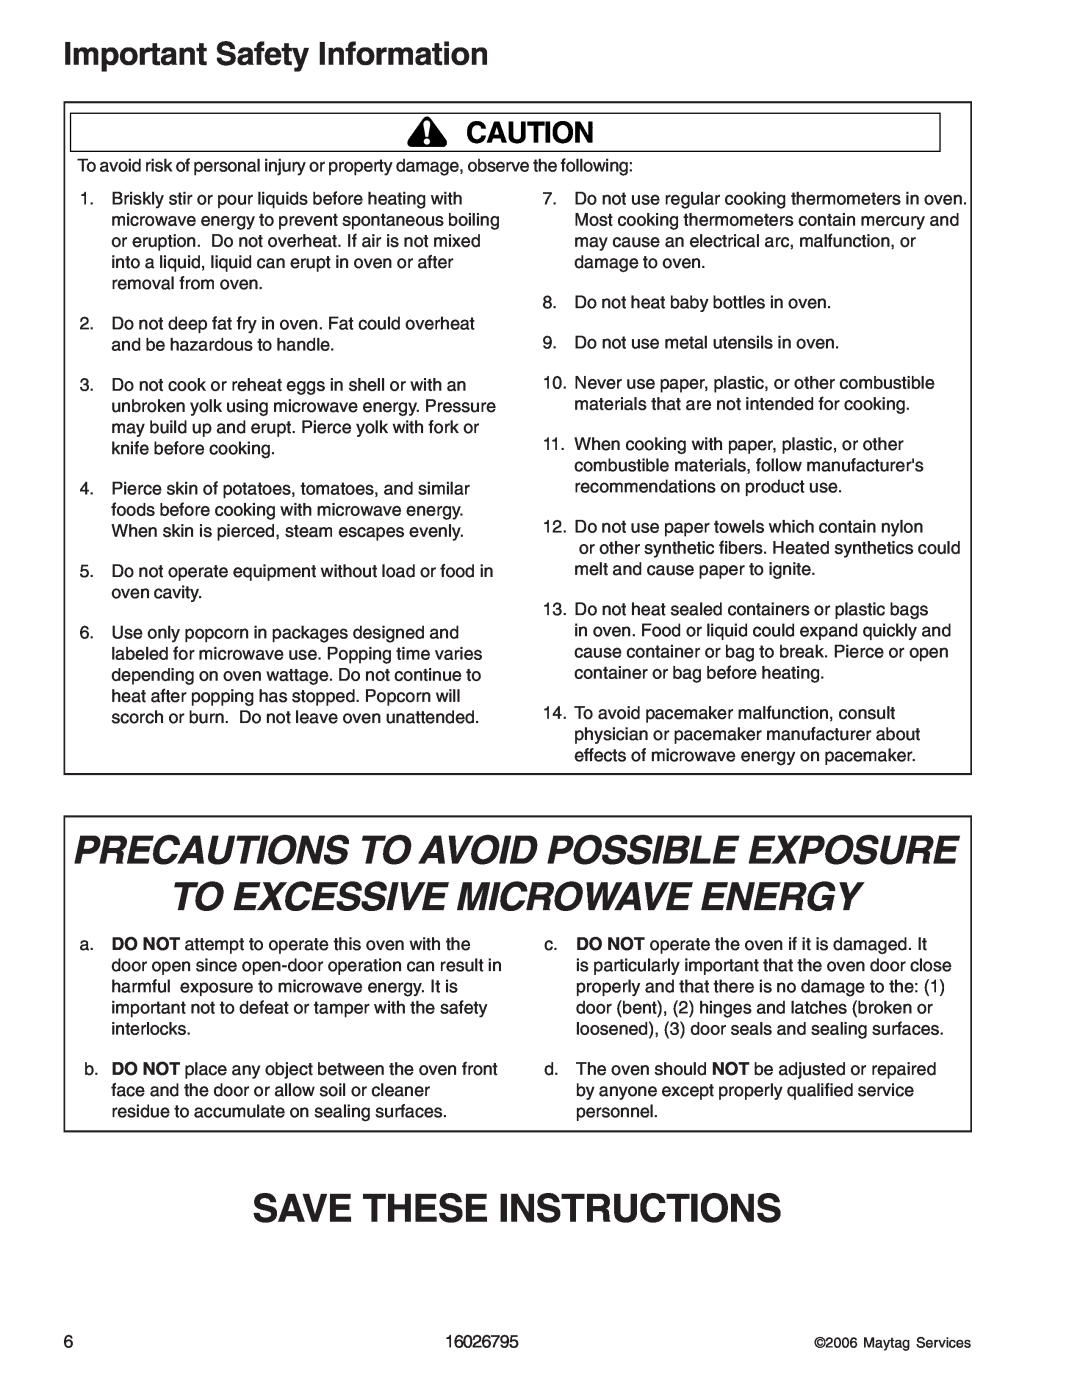 Maytag 1800 W - 2005 manual Precautions To Avoid Possible Exposure To Excessive Microwave Energy, Save These Instructions 